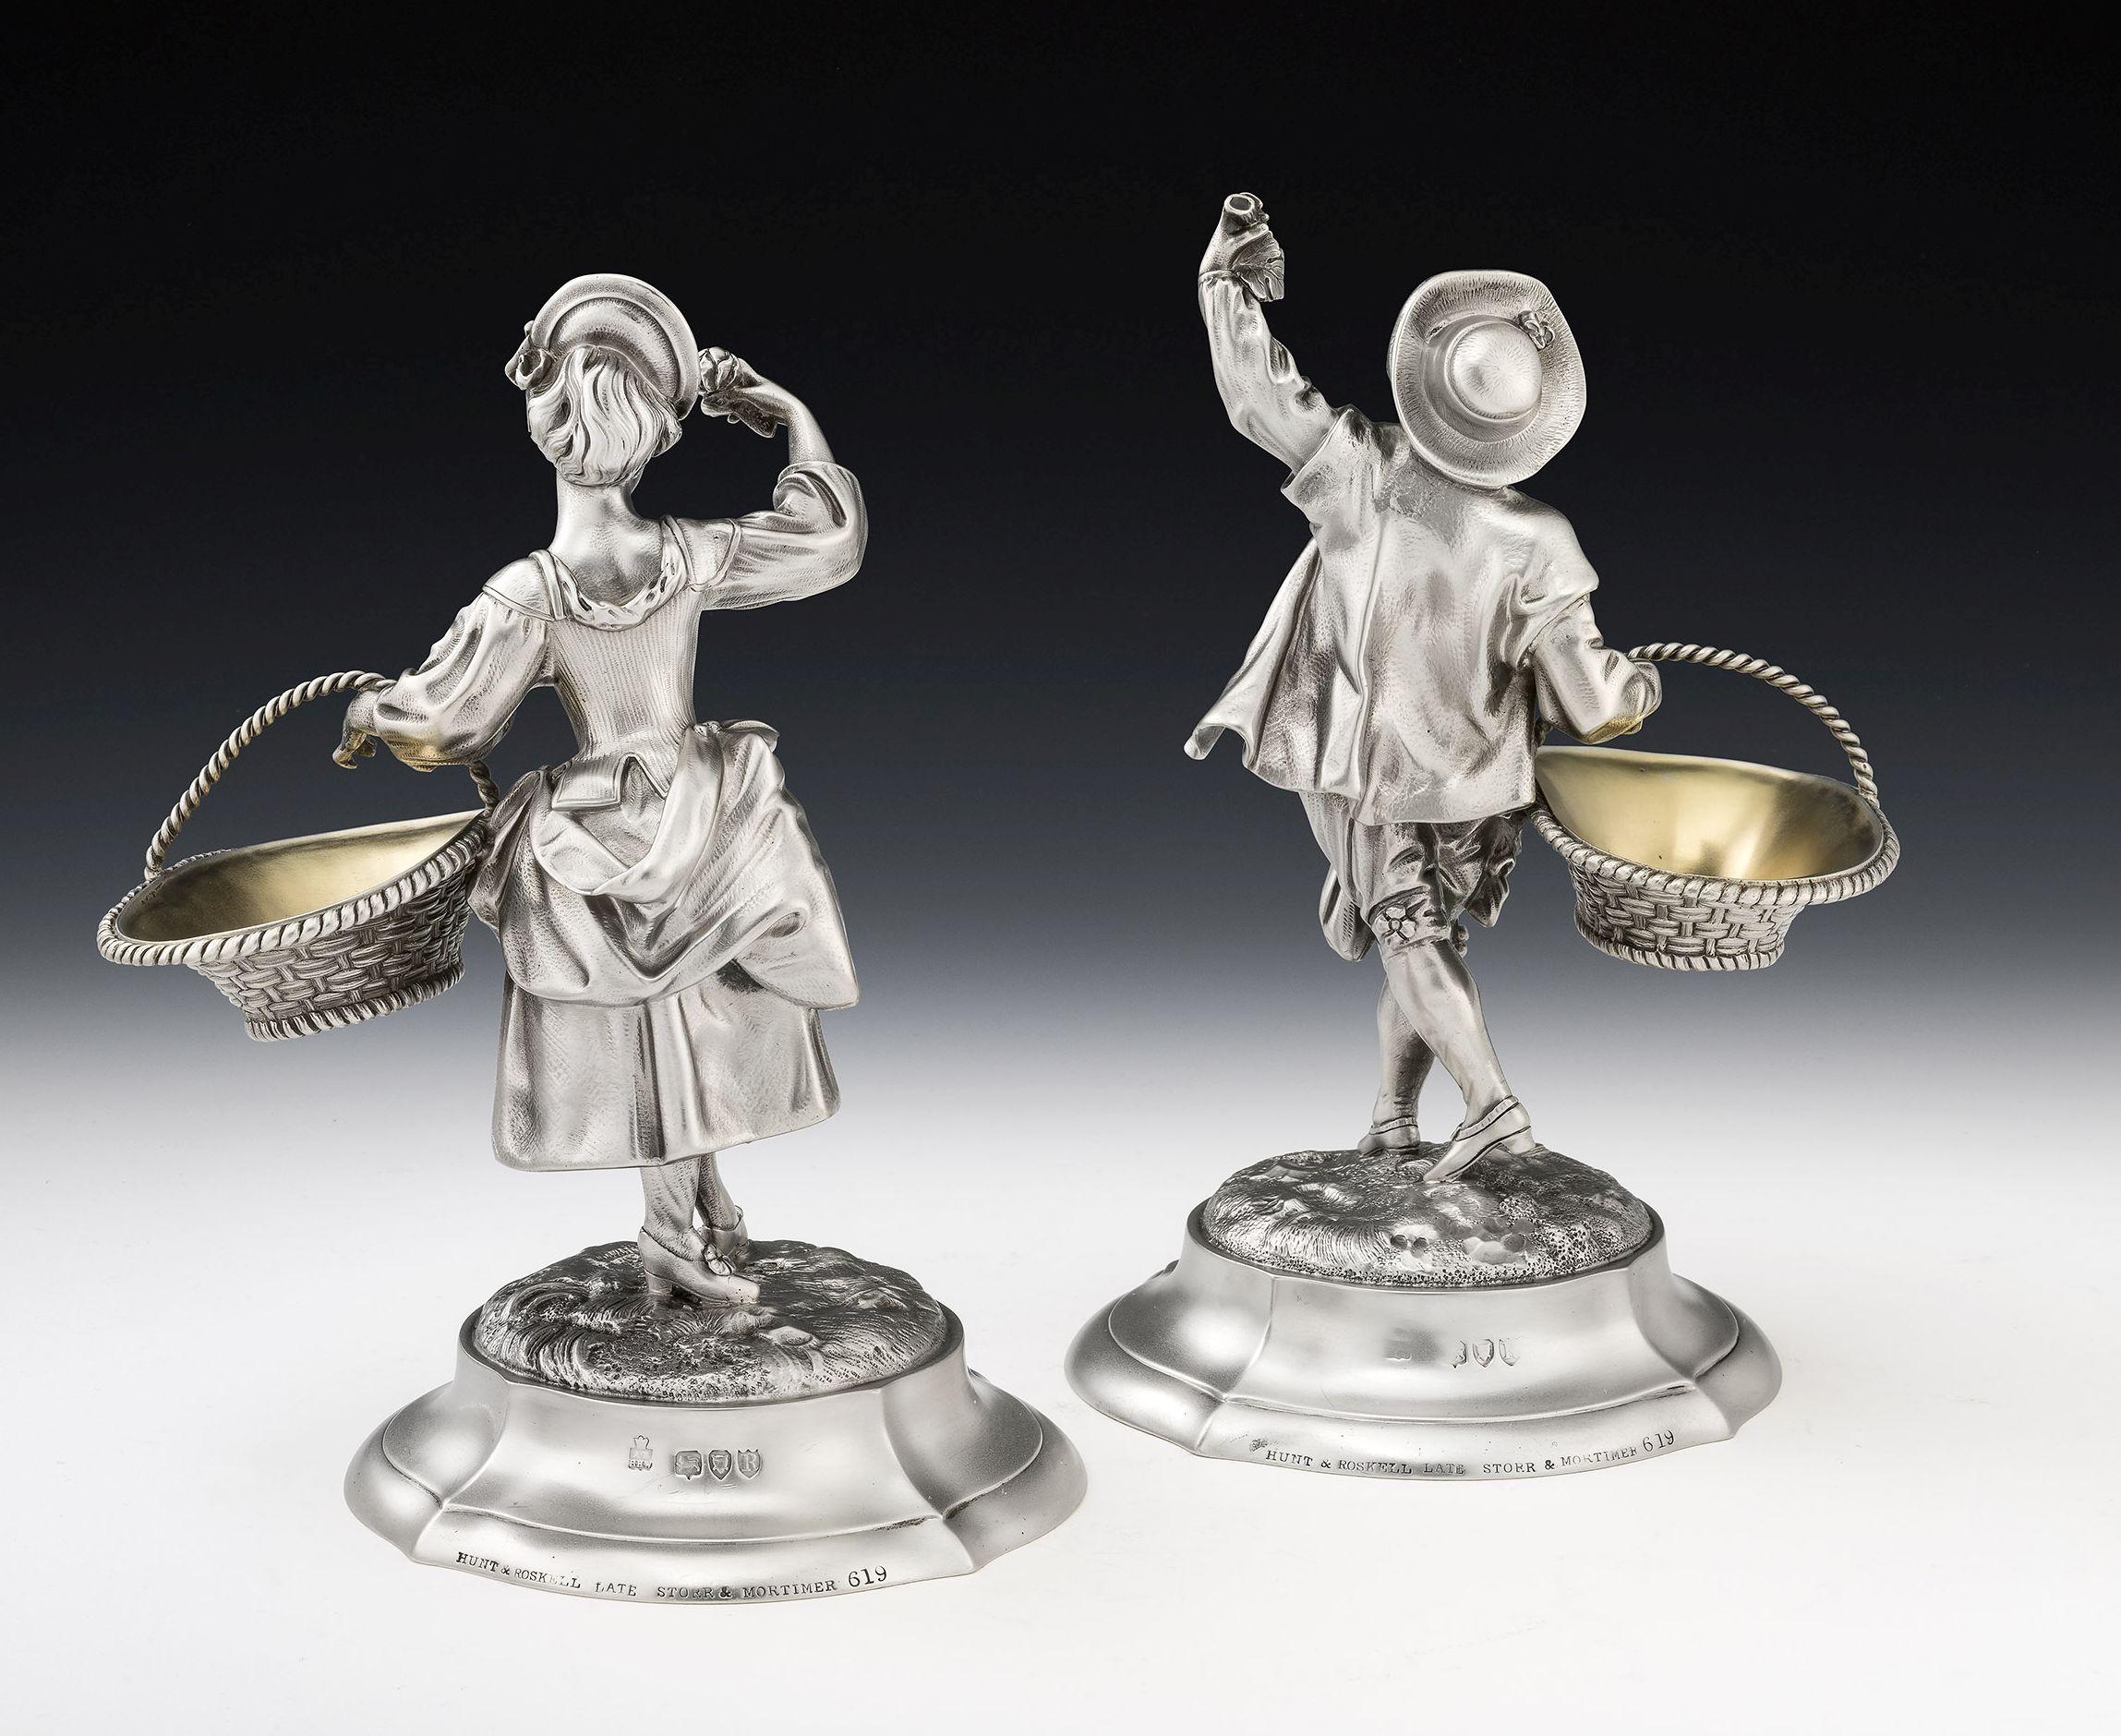 These important figural cast Pedlar Salt Cellars were made in London in 1892 by Alfred Benson & Henry Hugh Webb and retailed Hunt & Roskell. As you will see from the images the Salt Cellars are modelled as a male and female pedlar in period Georgian